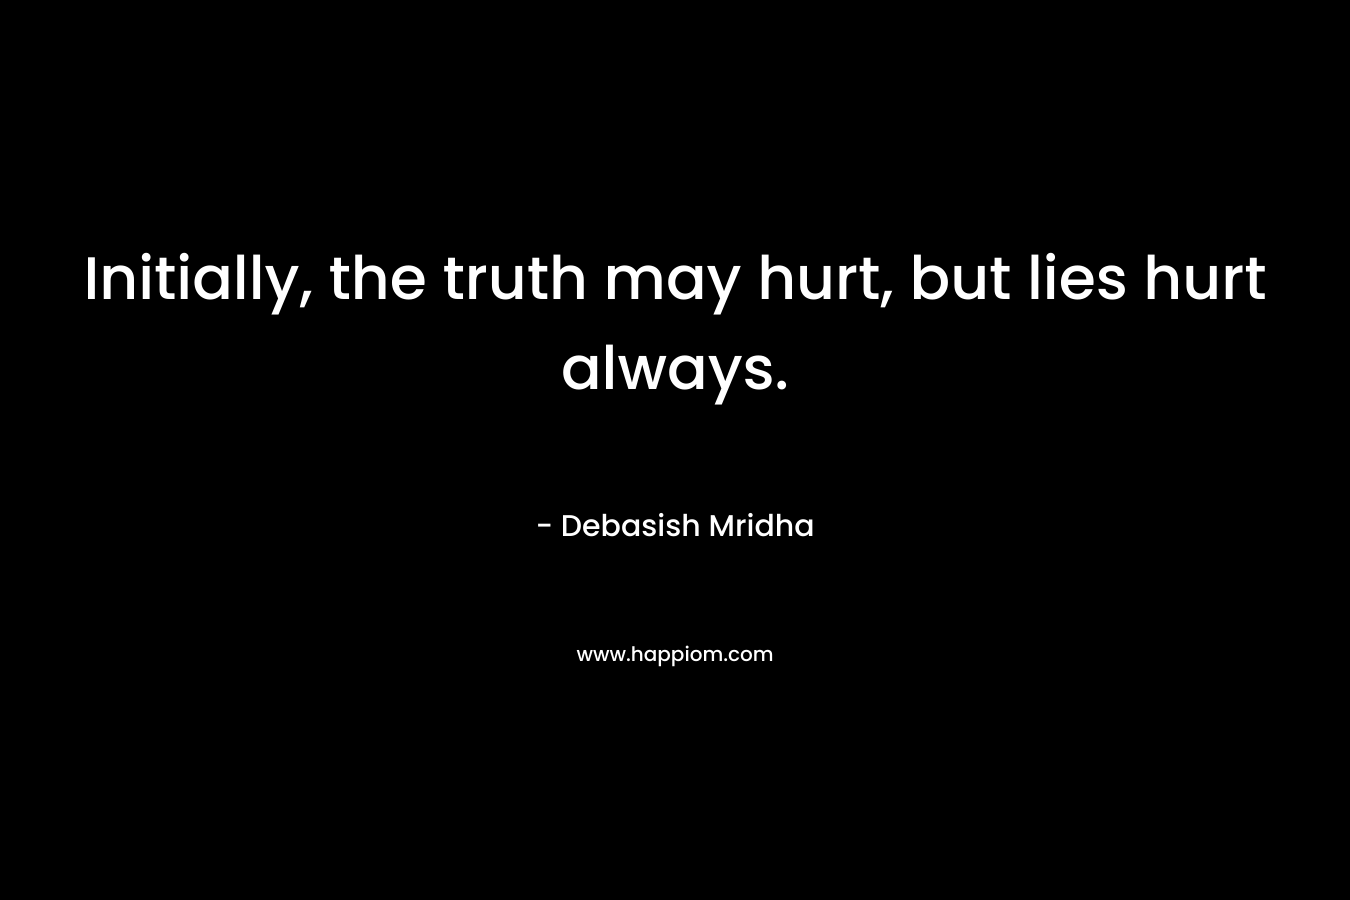 Initially, the truth may hurt, but lies hurt always.